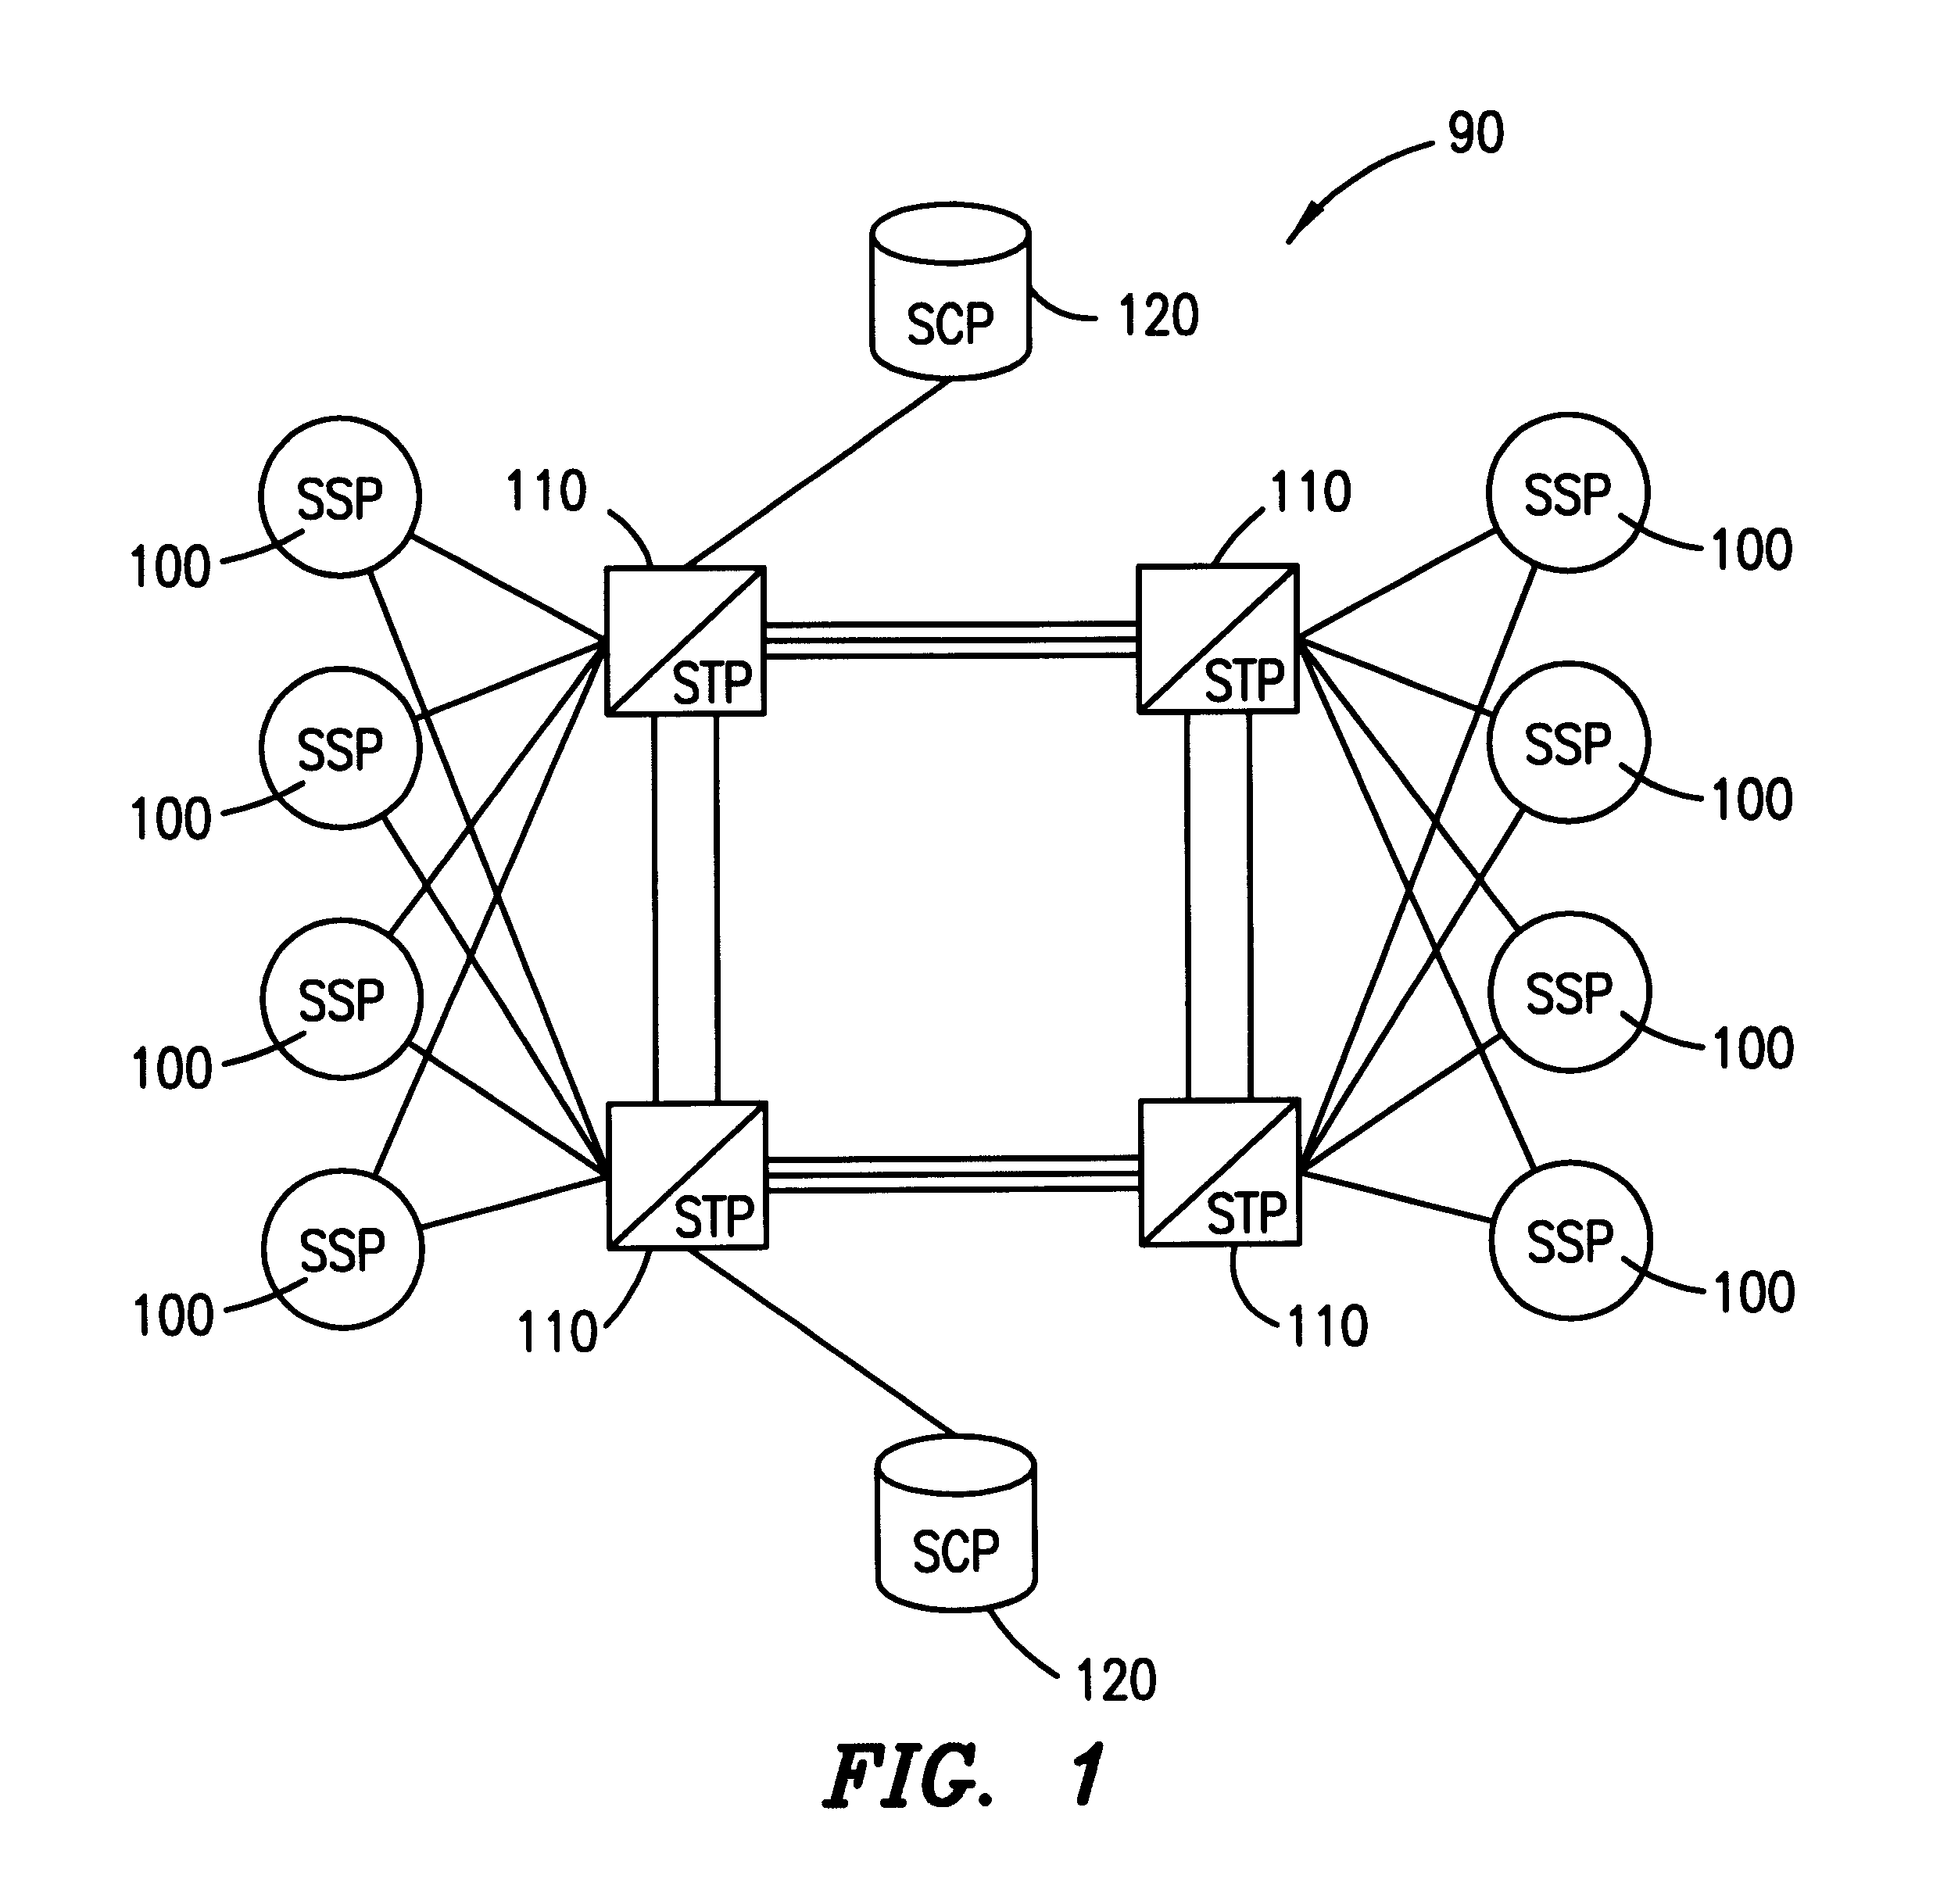 System, method and apparatus for direct voice mail access and blocking